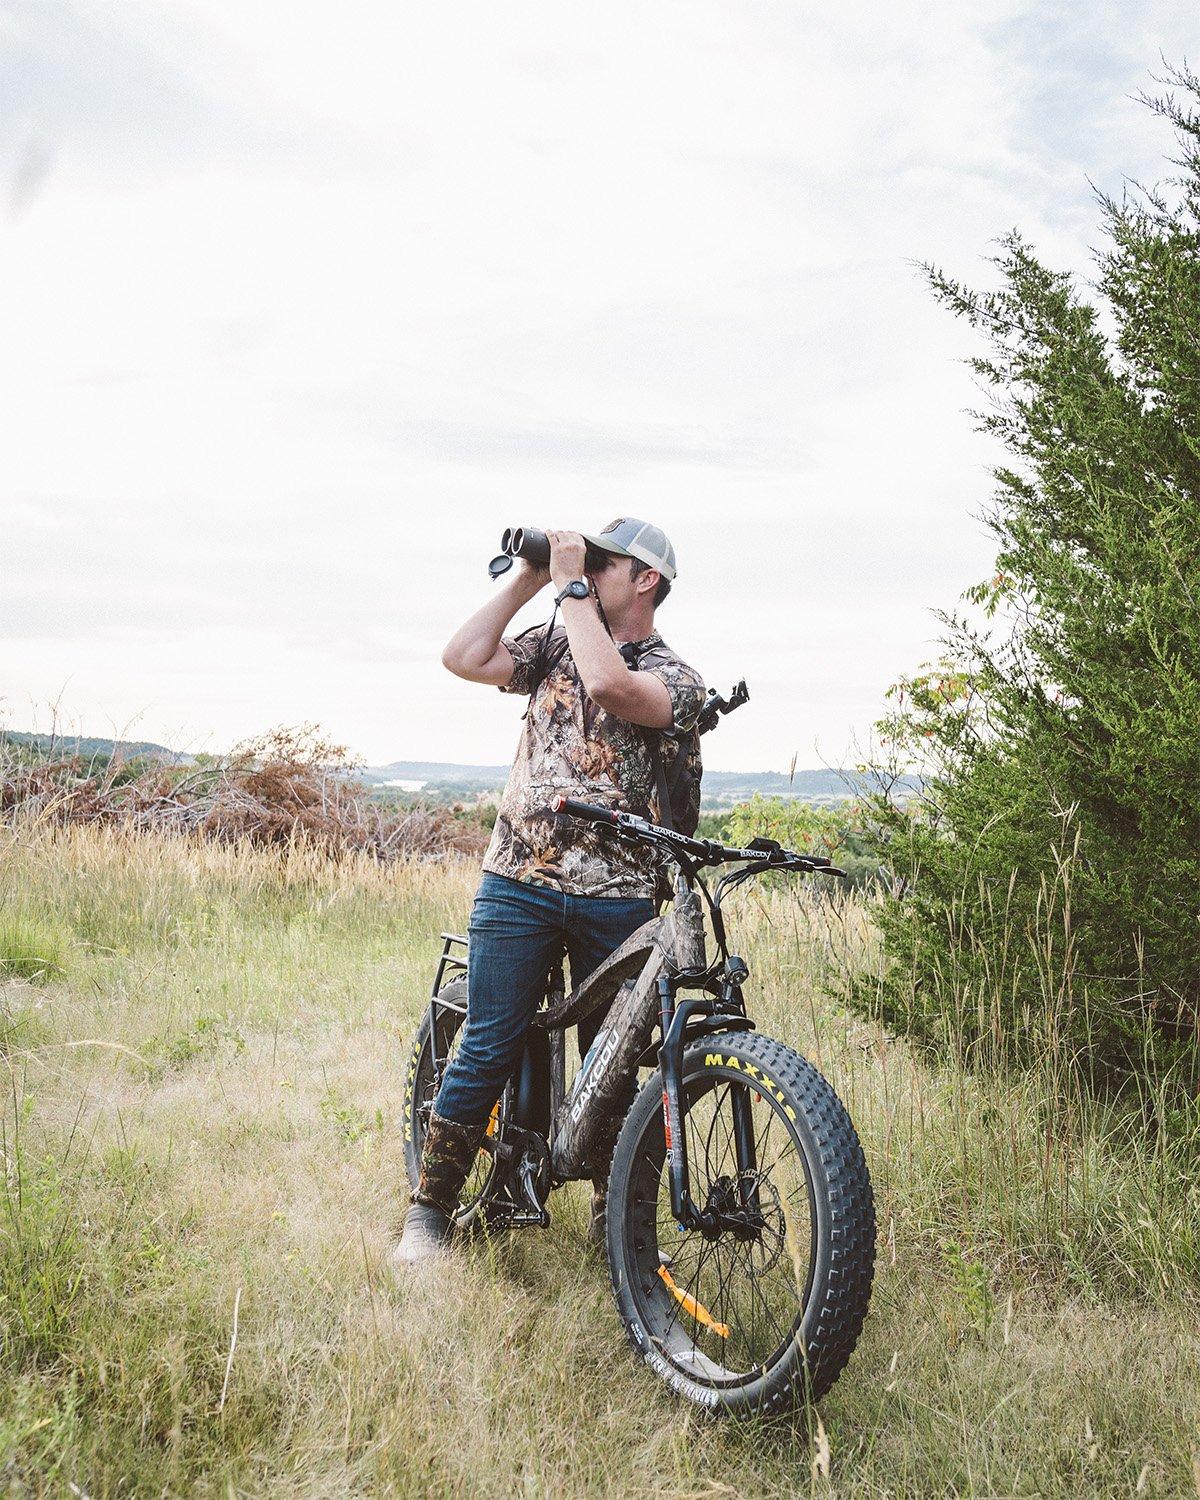 Realtree's Tyler Jordan field-tests one of Bakcou's nifty e-bikes. A headlight and mud fenders trick them out, and you can bungee cord a wild turkey to the rear pannier rack. Image by Realtree 365